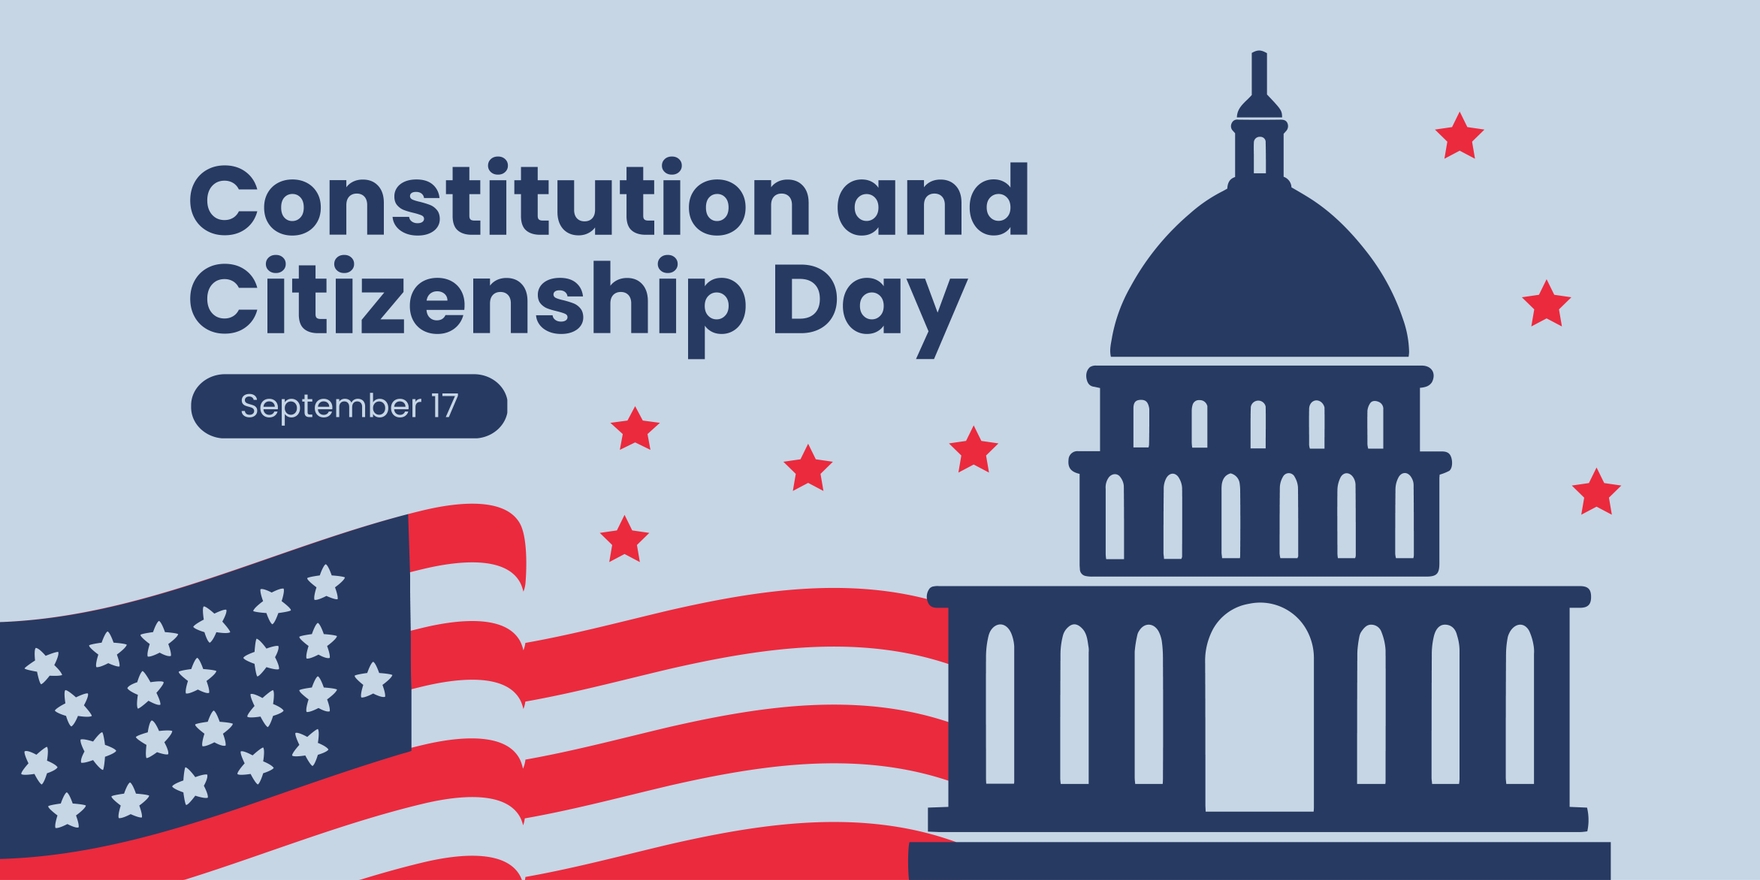 Free Constitution and Citizenship Day Banner in Illustrator, PSD, EPS, SVG, JPG, PNG